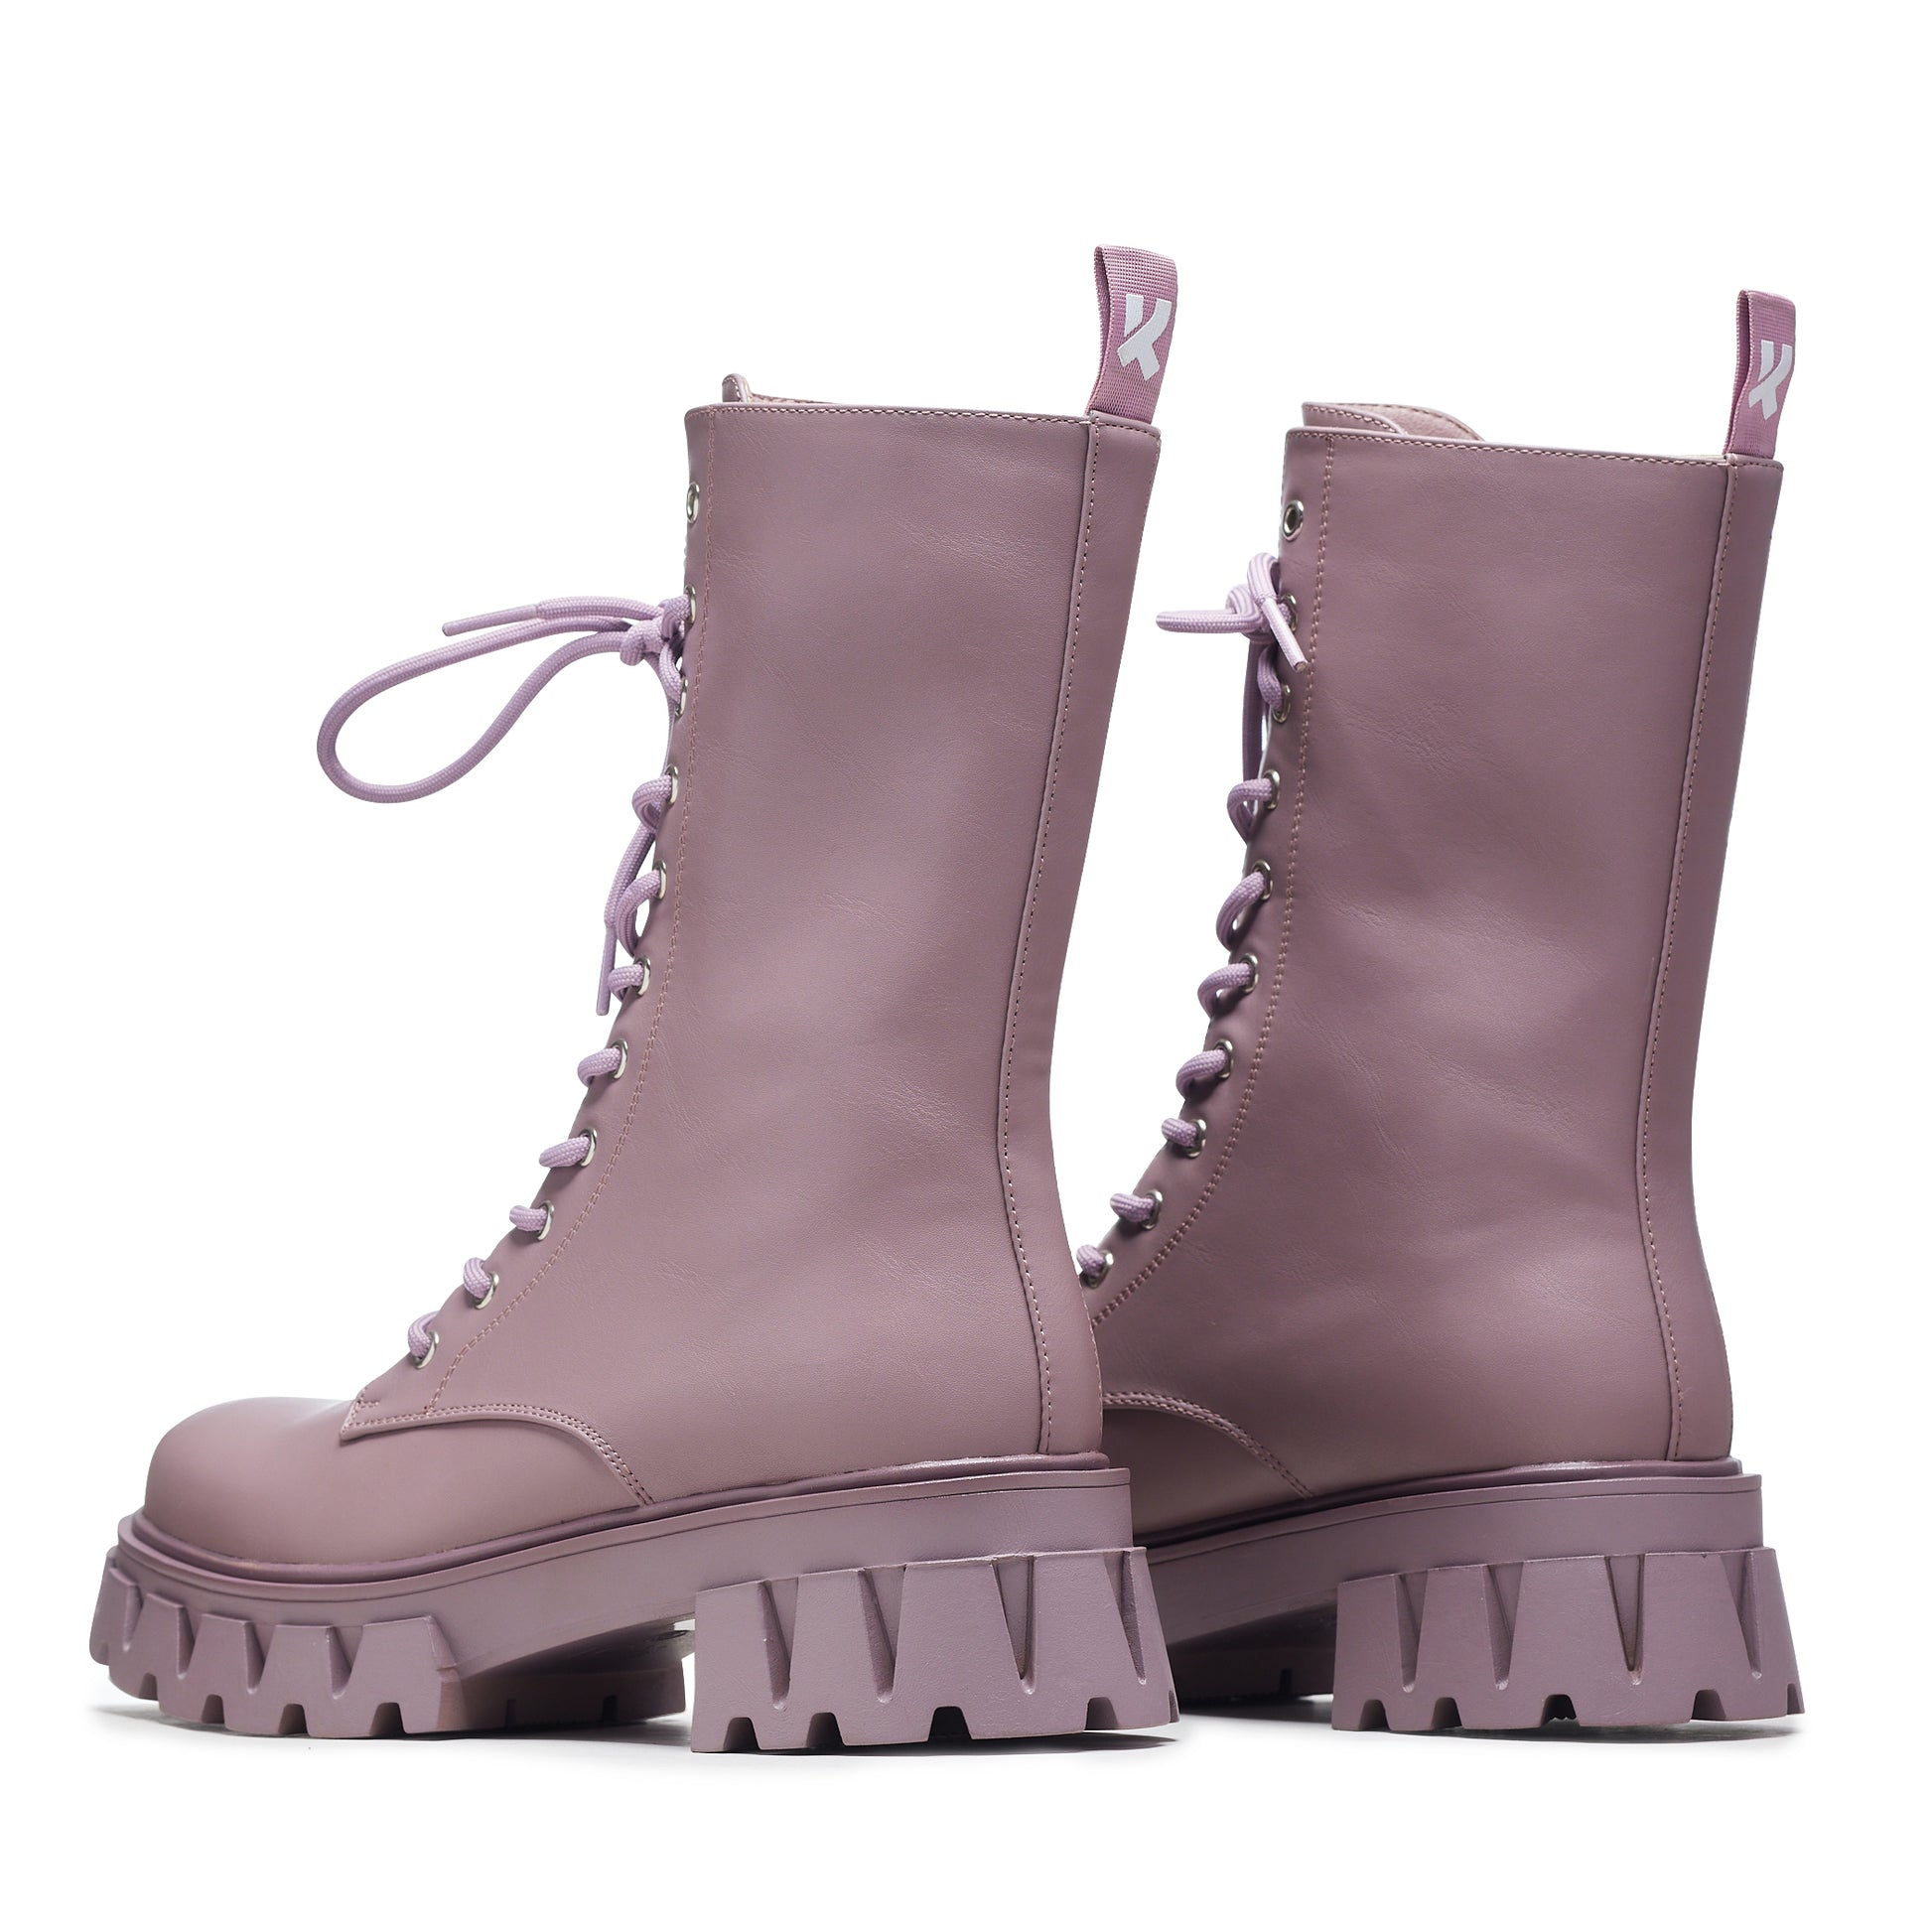 Siren Tall Lace Up Boots - Berry - Ankle Boots - KOI Footwear - Purple - Back Side View